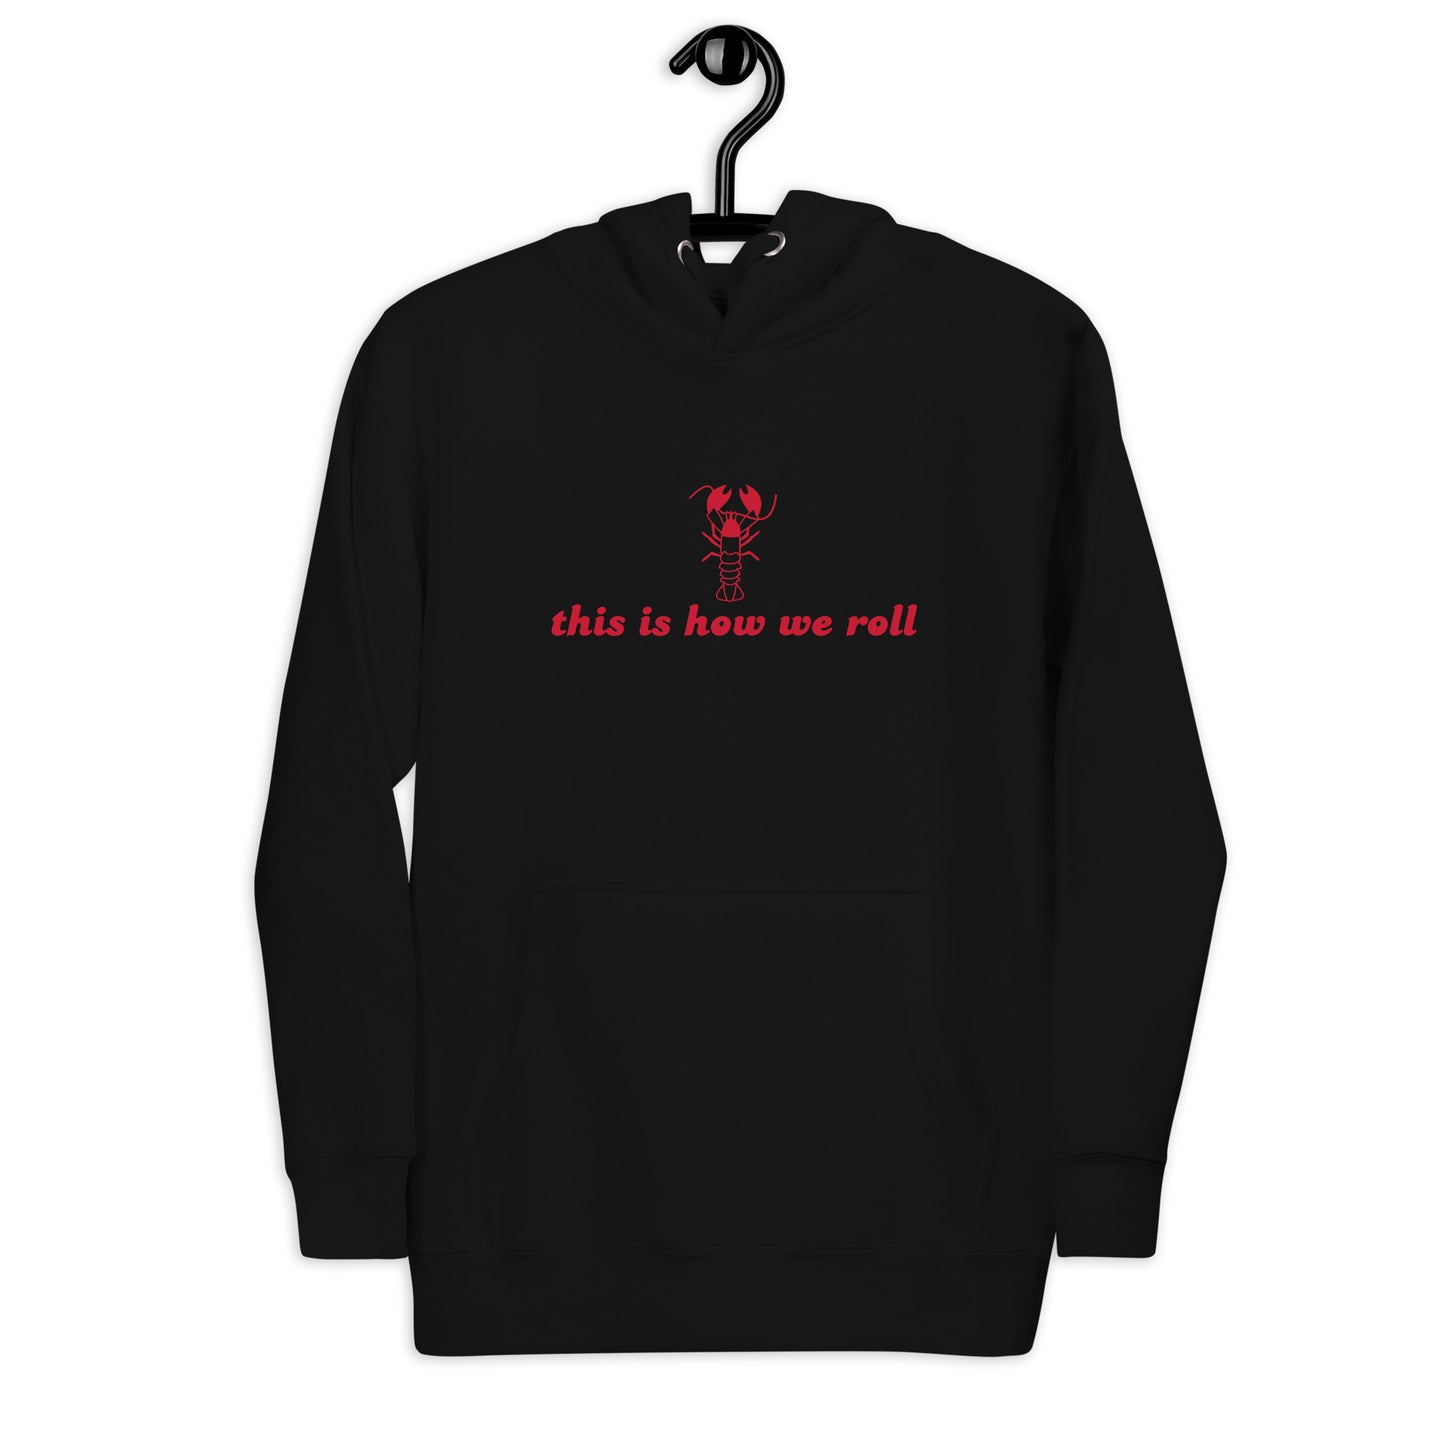 black hoodie that says "this is how we roll" in red lettering with red lobster graphic